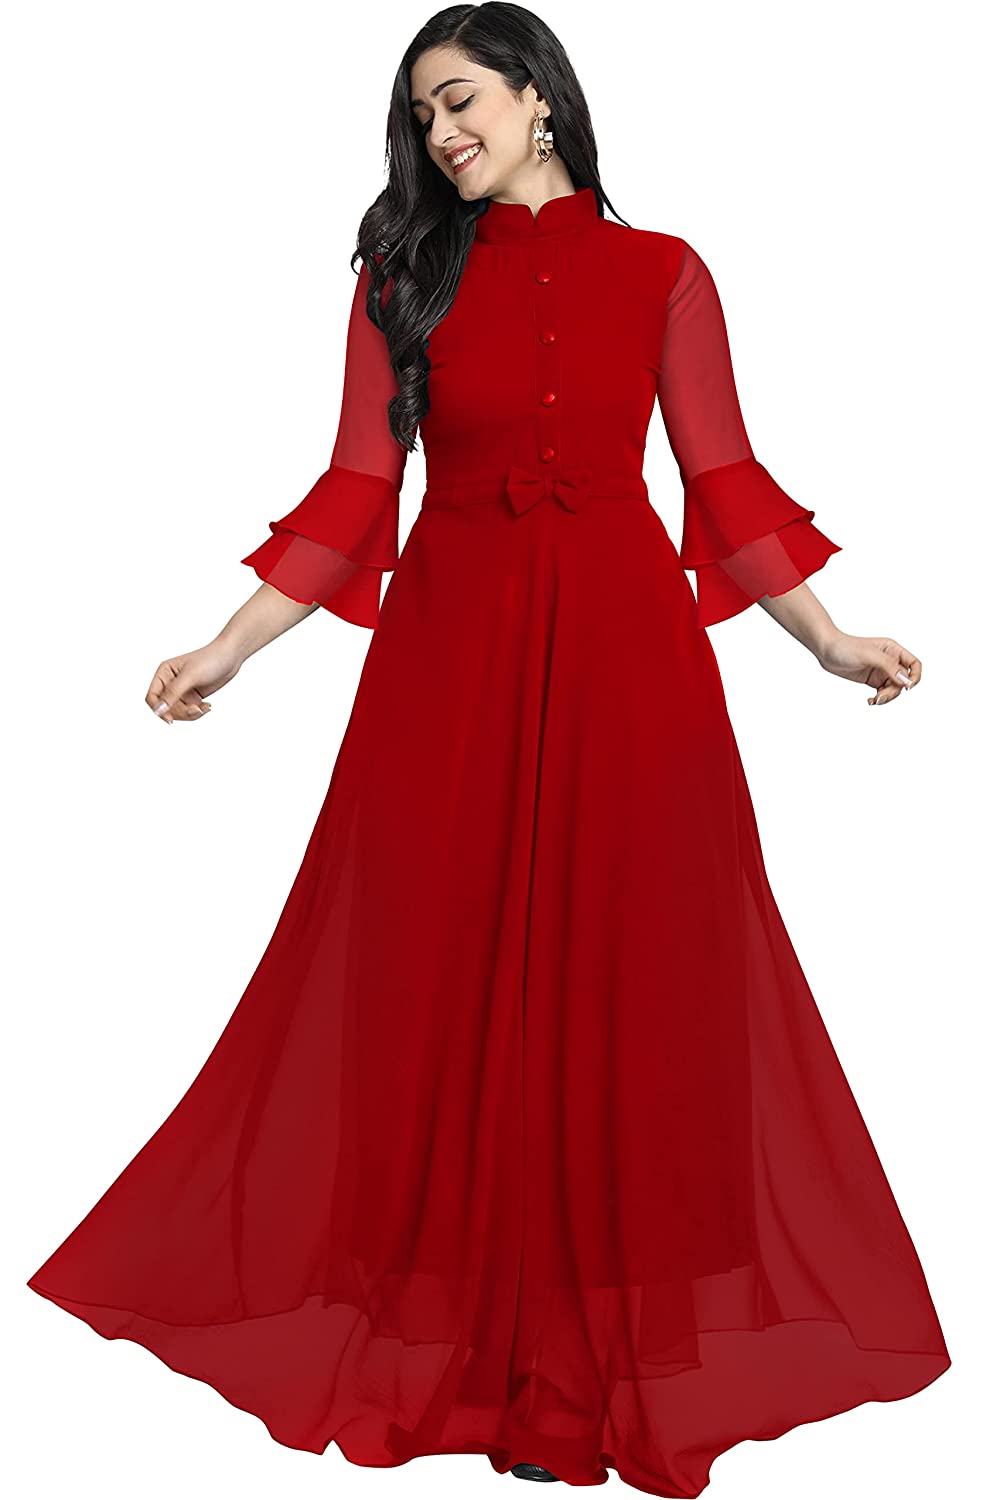 FIBREZA Women's Georgette Traditional A Line Western Long Dress with Collar Neck Flare Sleeve Pattern -  Dresses in Sri Lanka from Arcade Online Shopping - Just Rs. 6299!